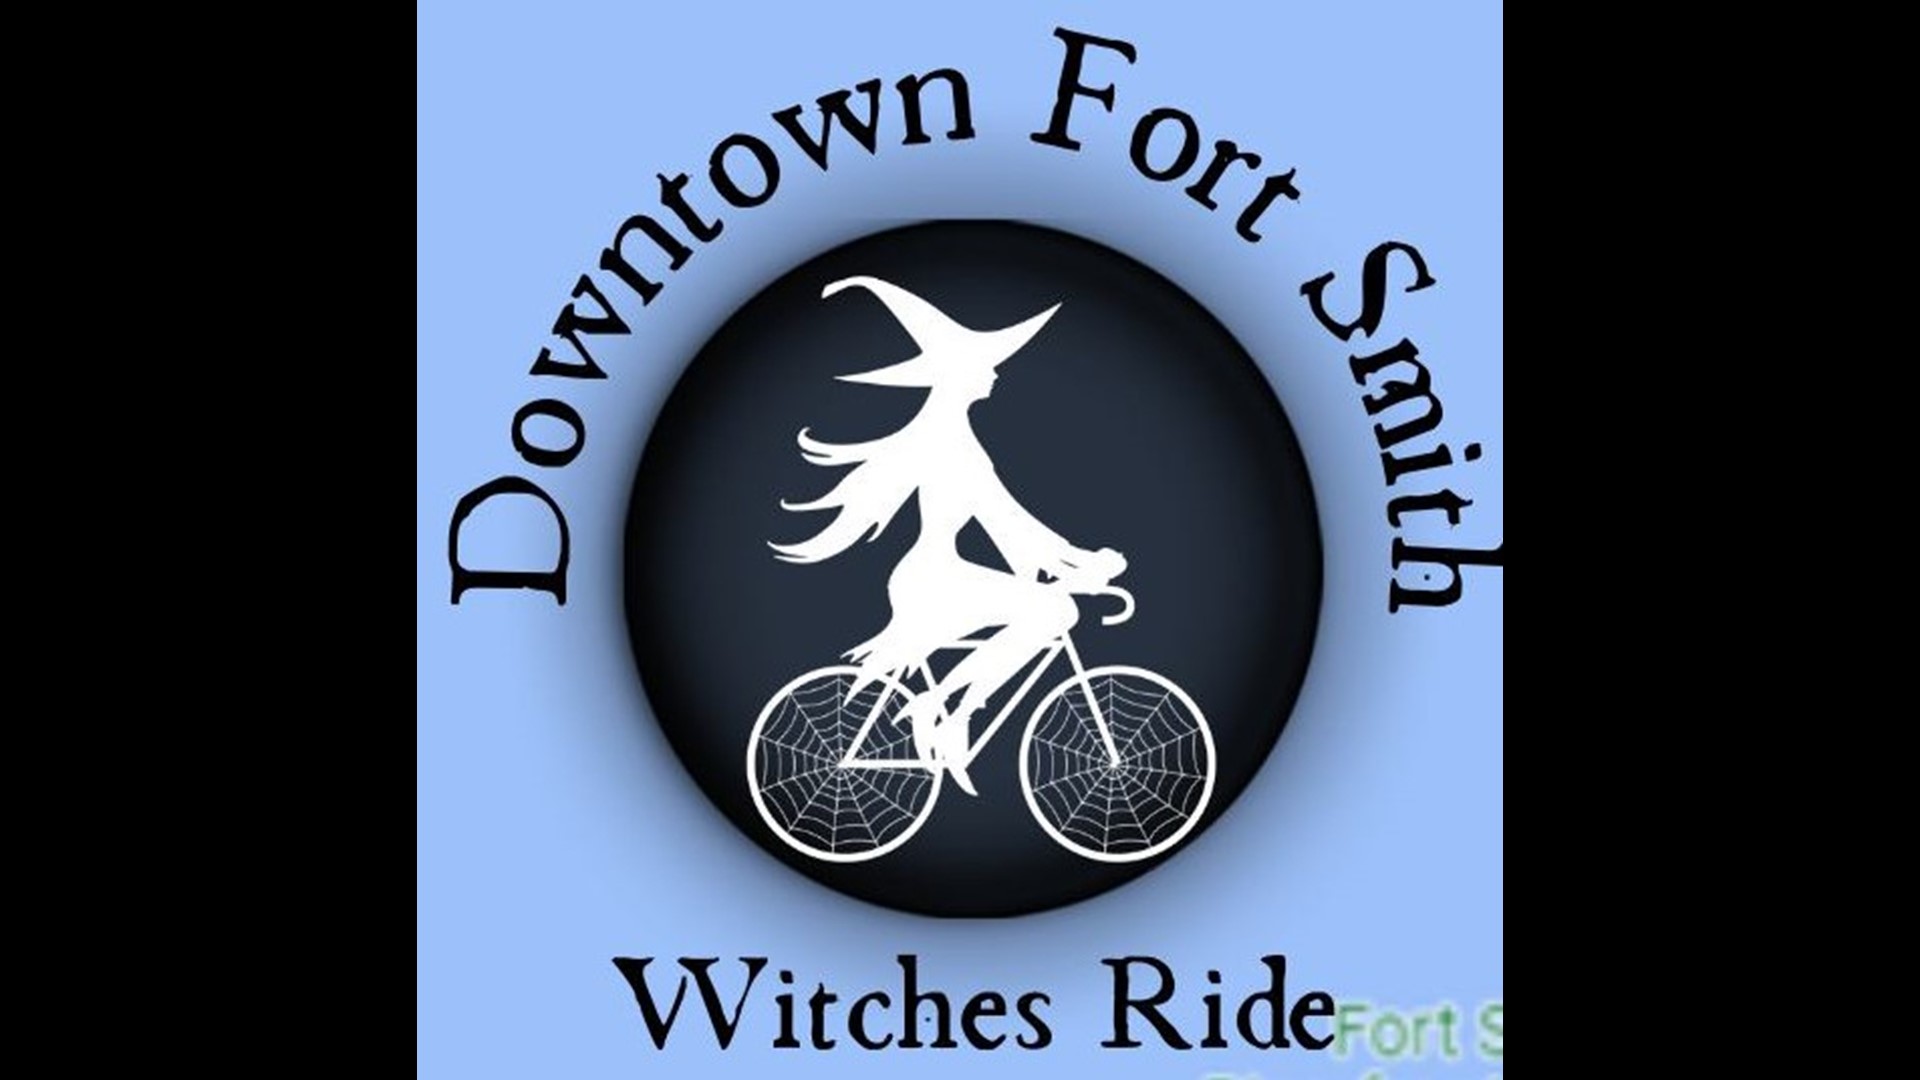 The event will benefit several non-profits.  Dress up like a witch, decorate a bicycle and you're in.  Daren visits with organizers about what's all involved.